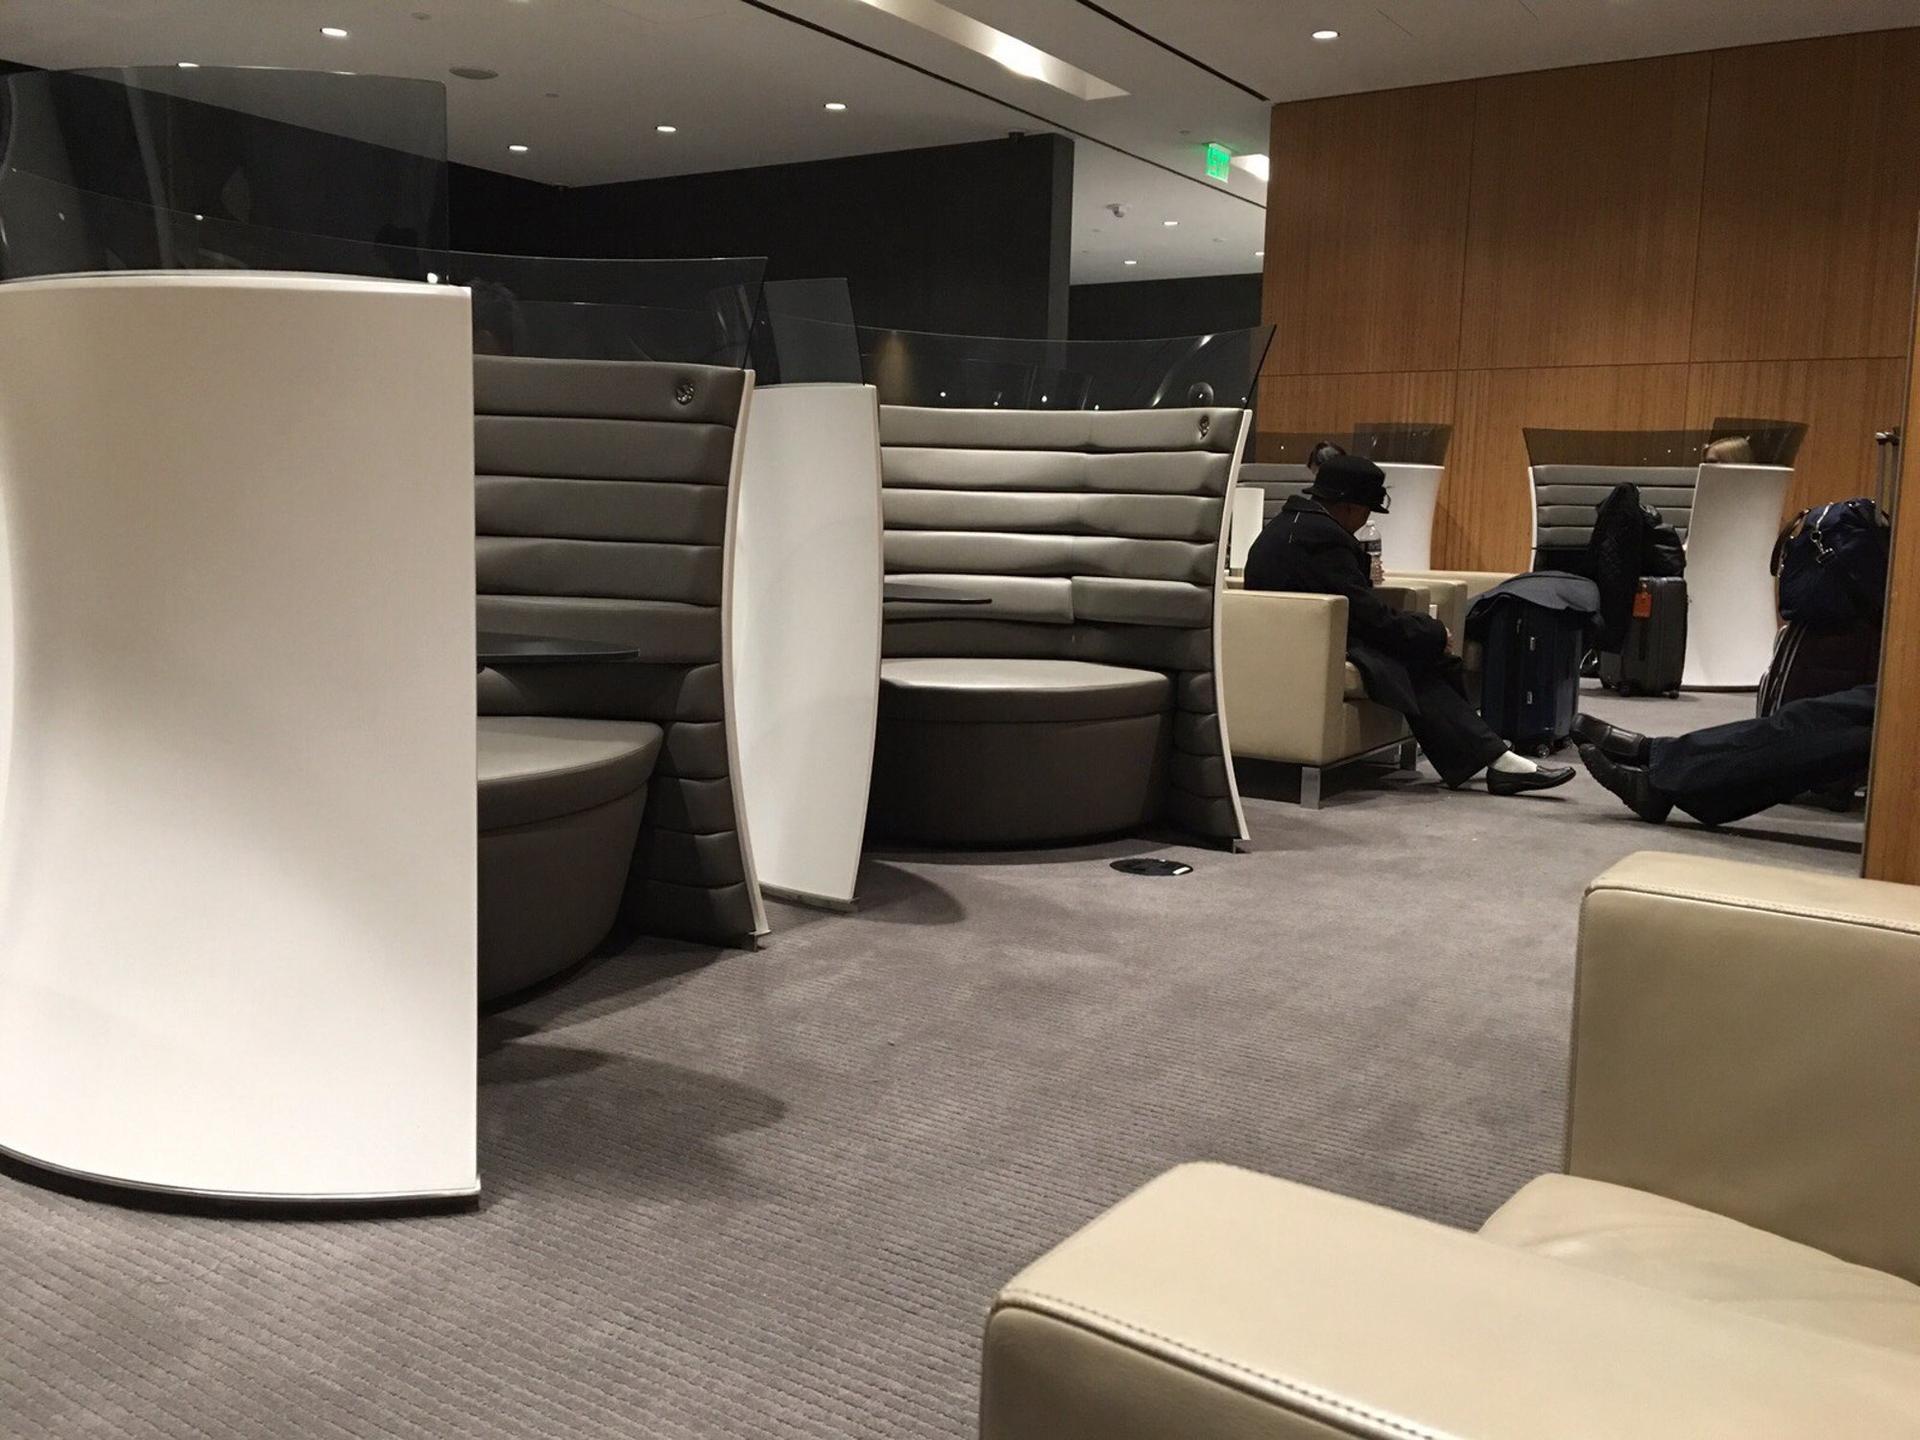 Cathay Pacific First and Business Class Lounge image 53 of 74